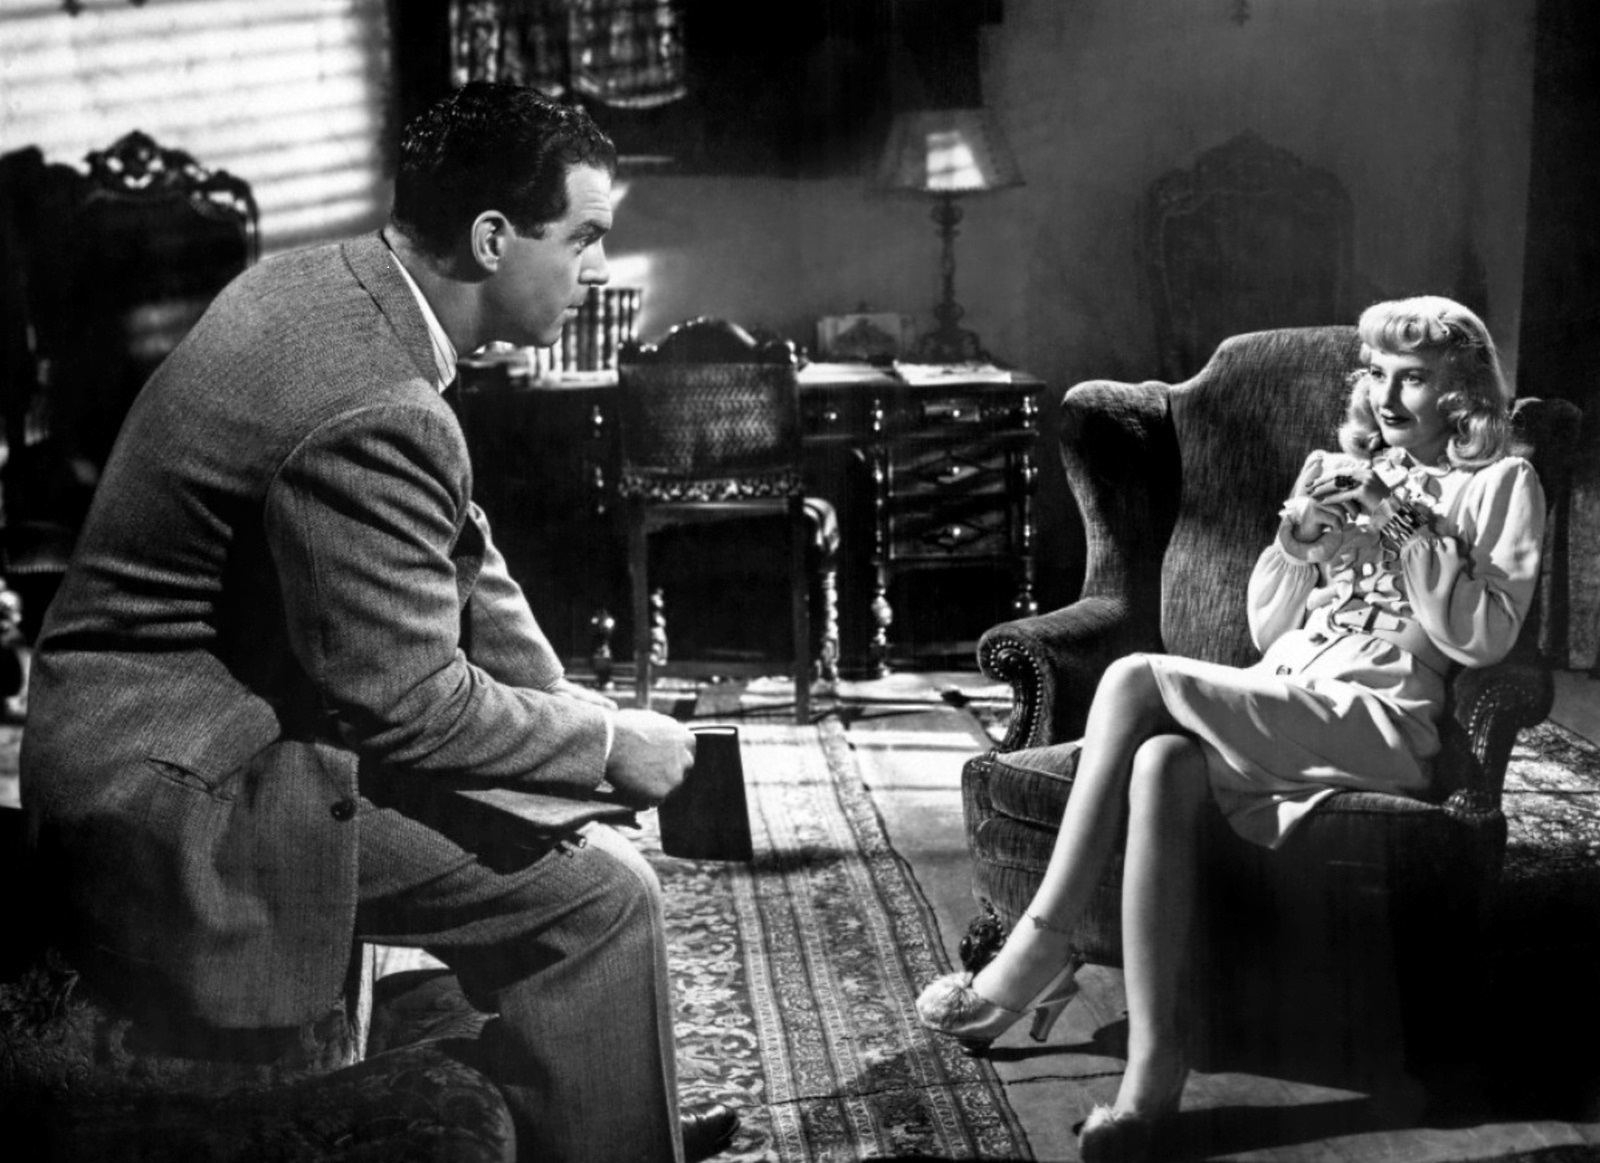 Fred MacMurray and Barbara Stanwyck in a promotional still from the 1944 film, "Double Indemnity"44 film, "Double Indemnity